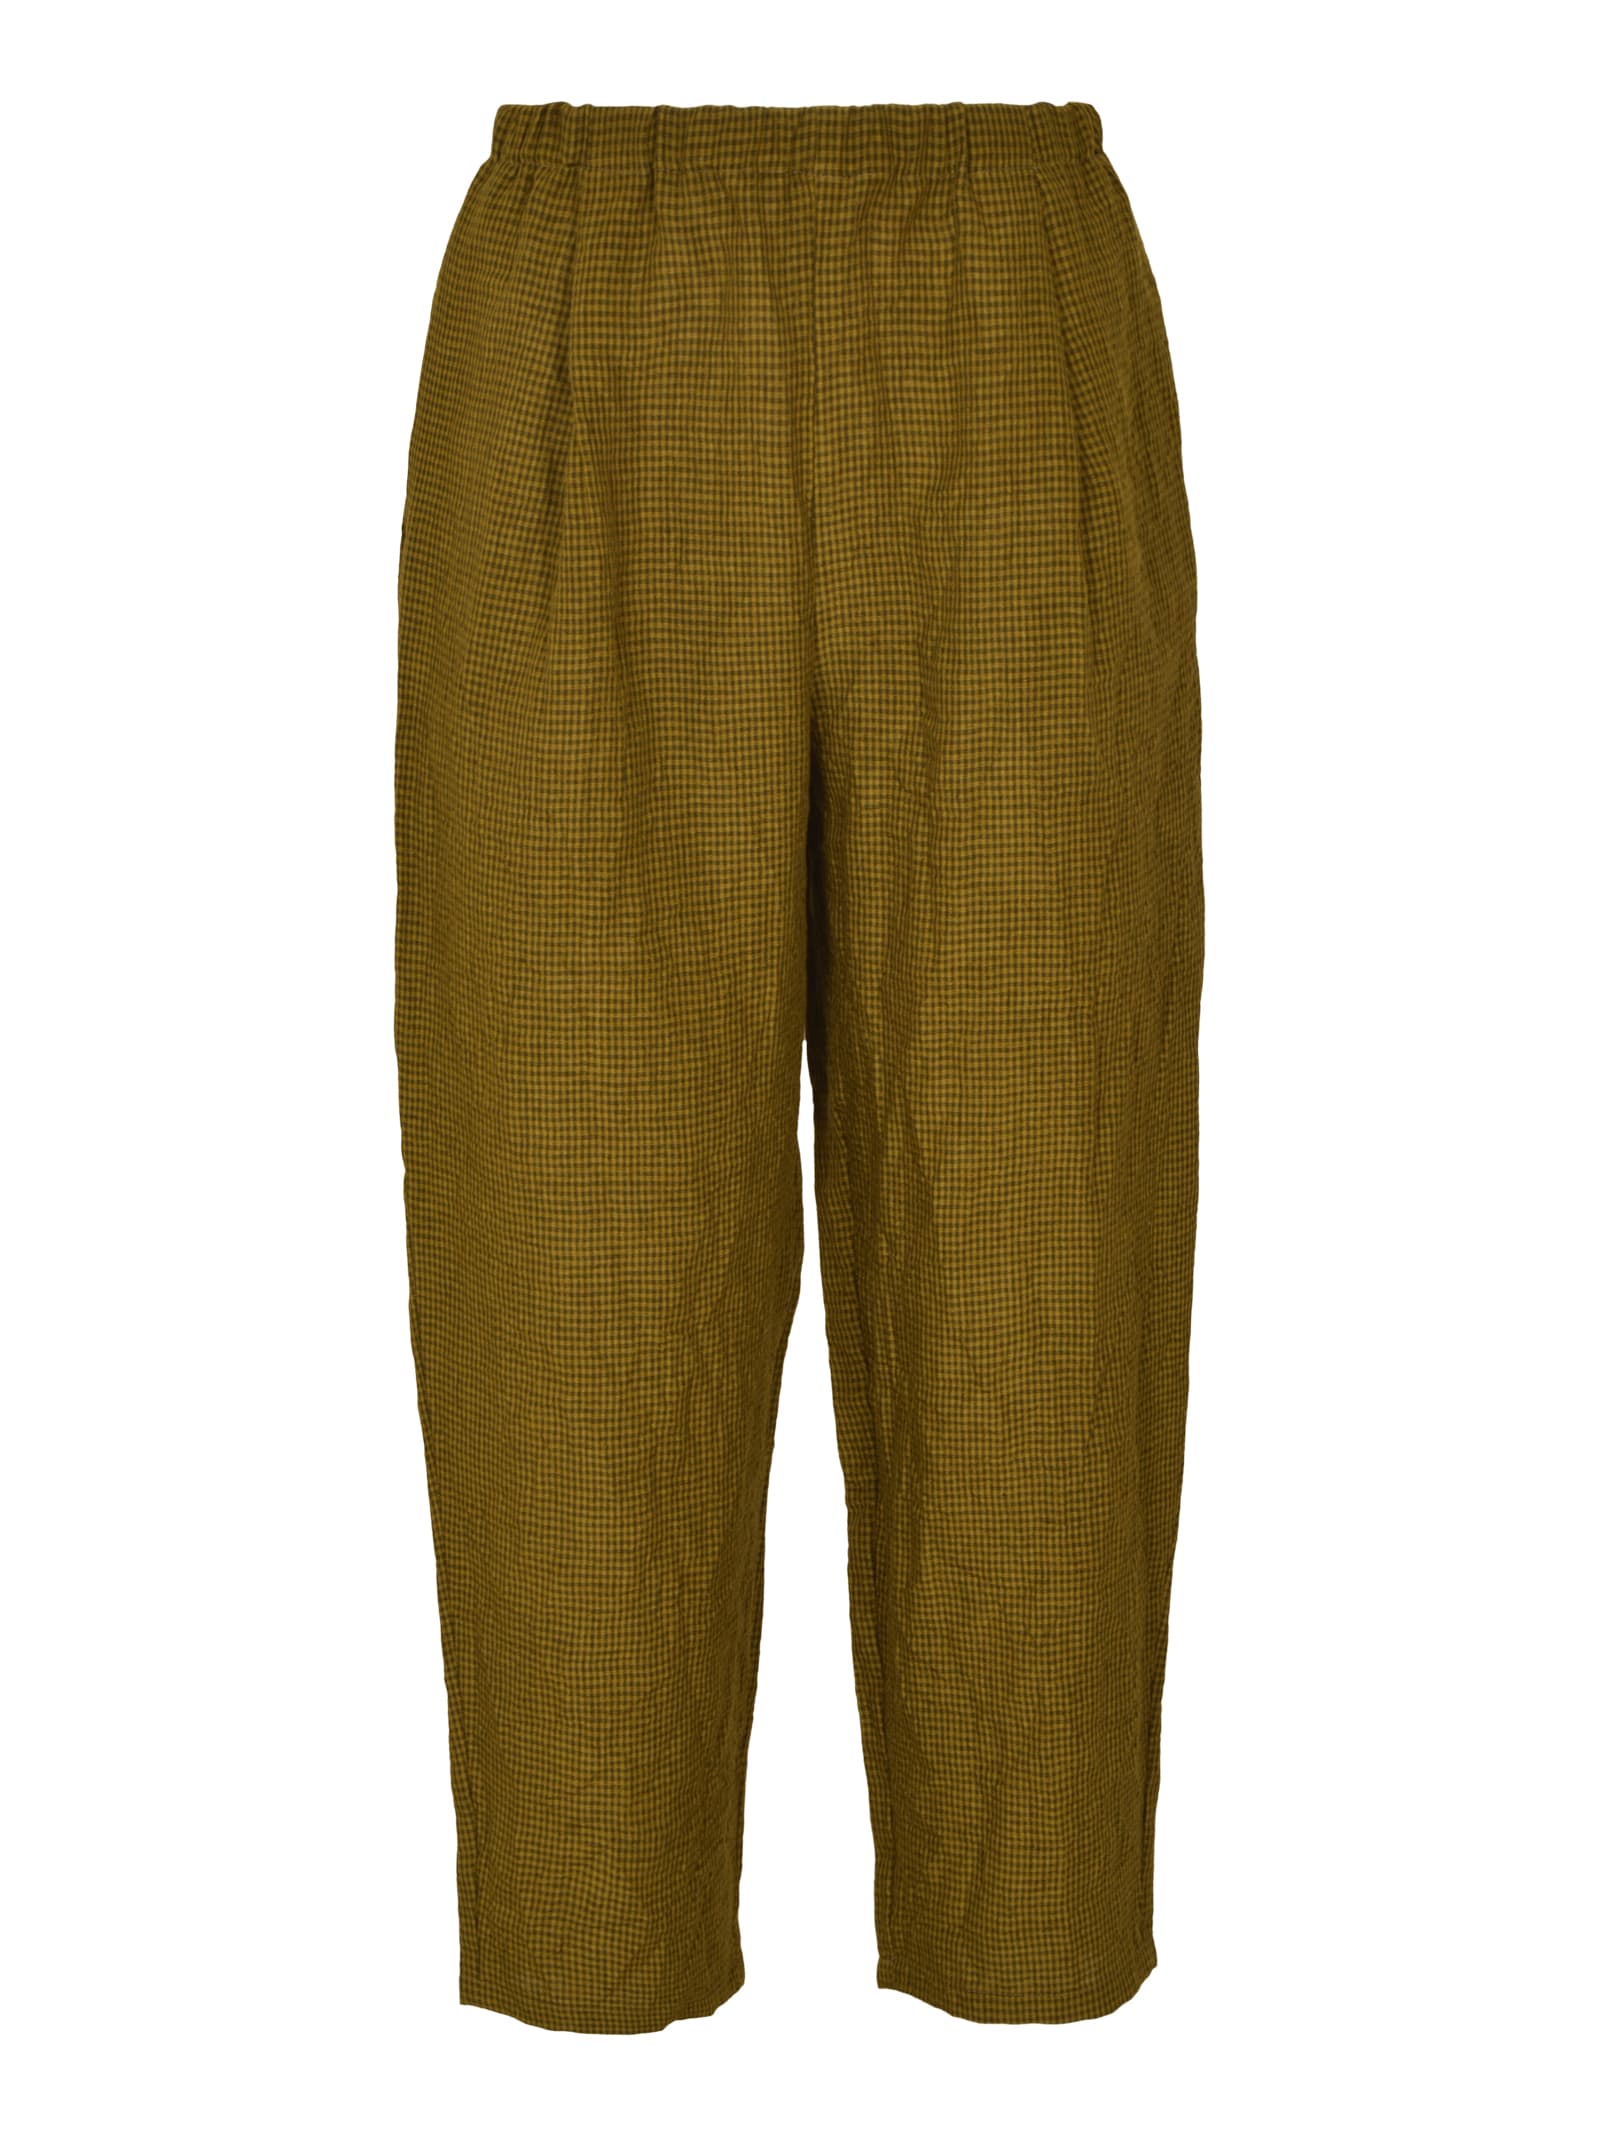 A Punto B Elastic Waist Check Cropped Trousers